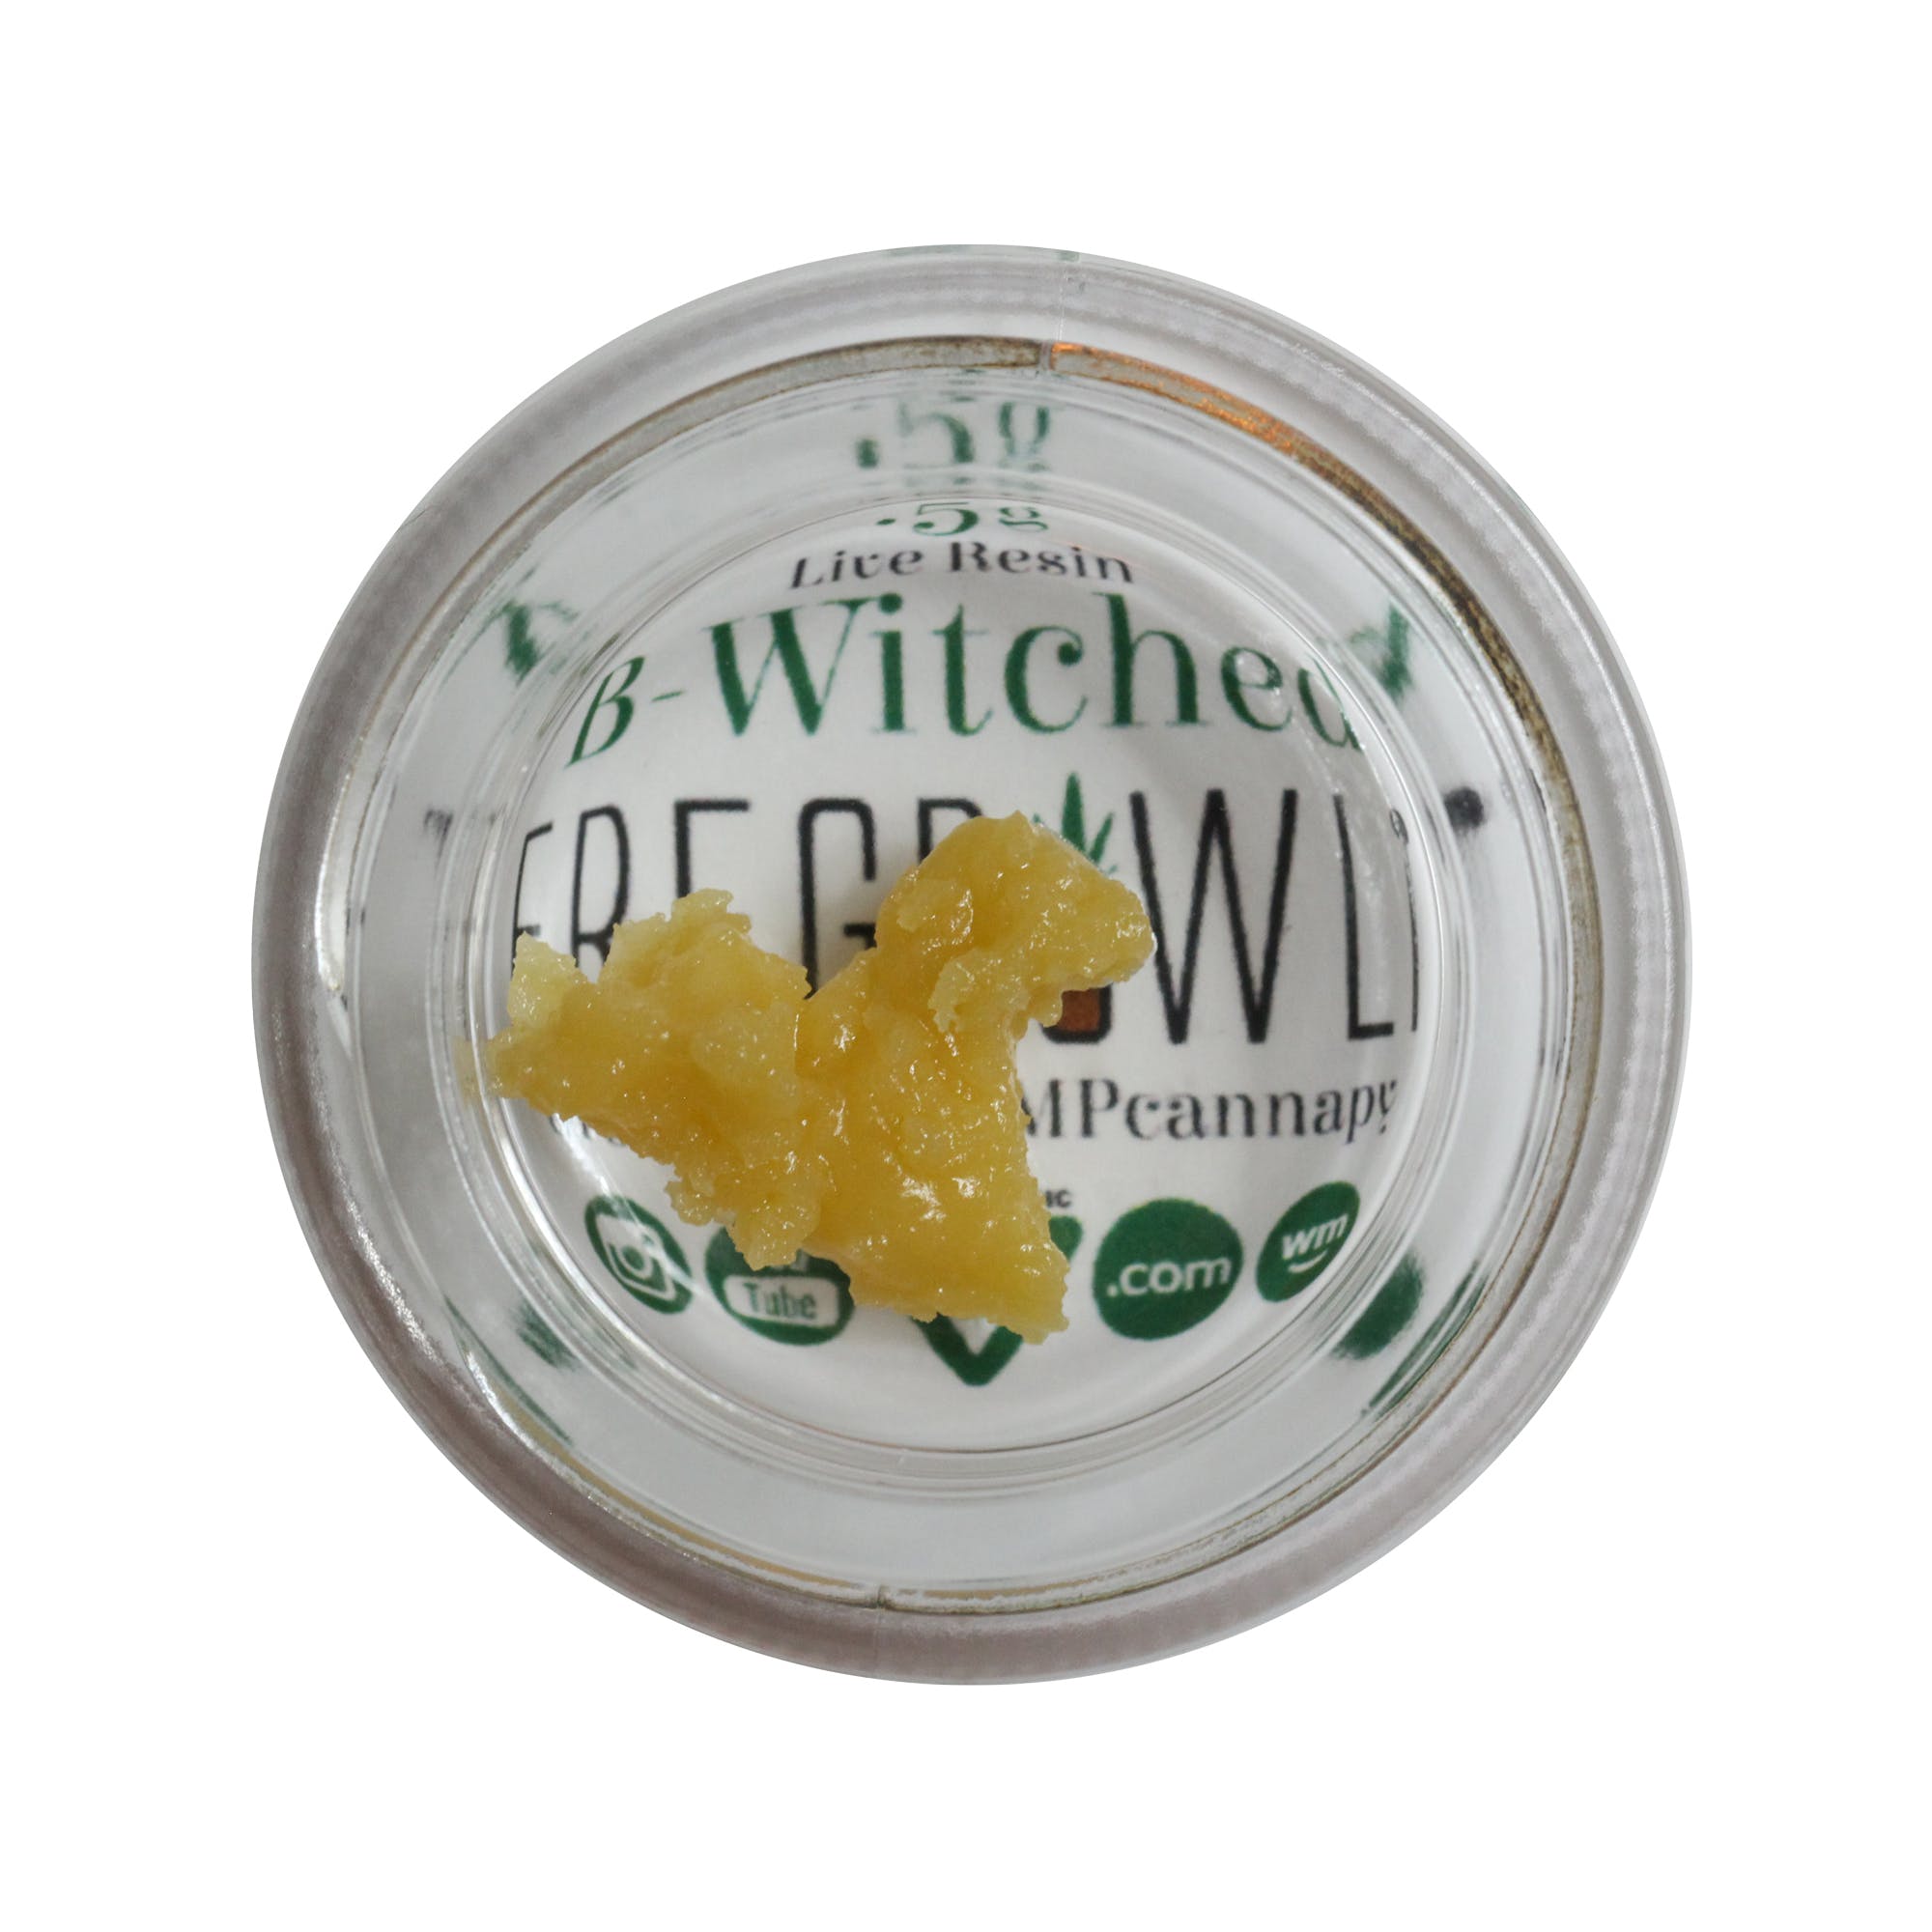 B-Witched Live Resin